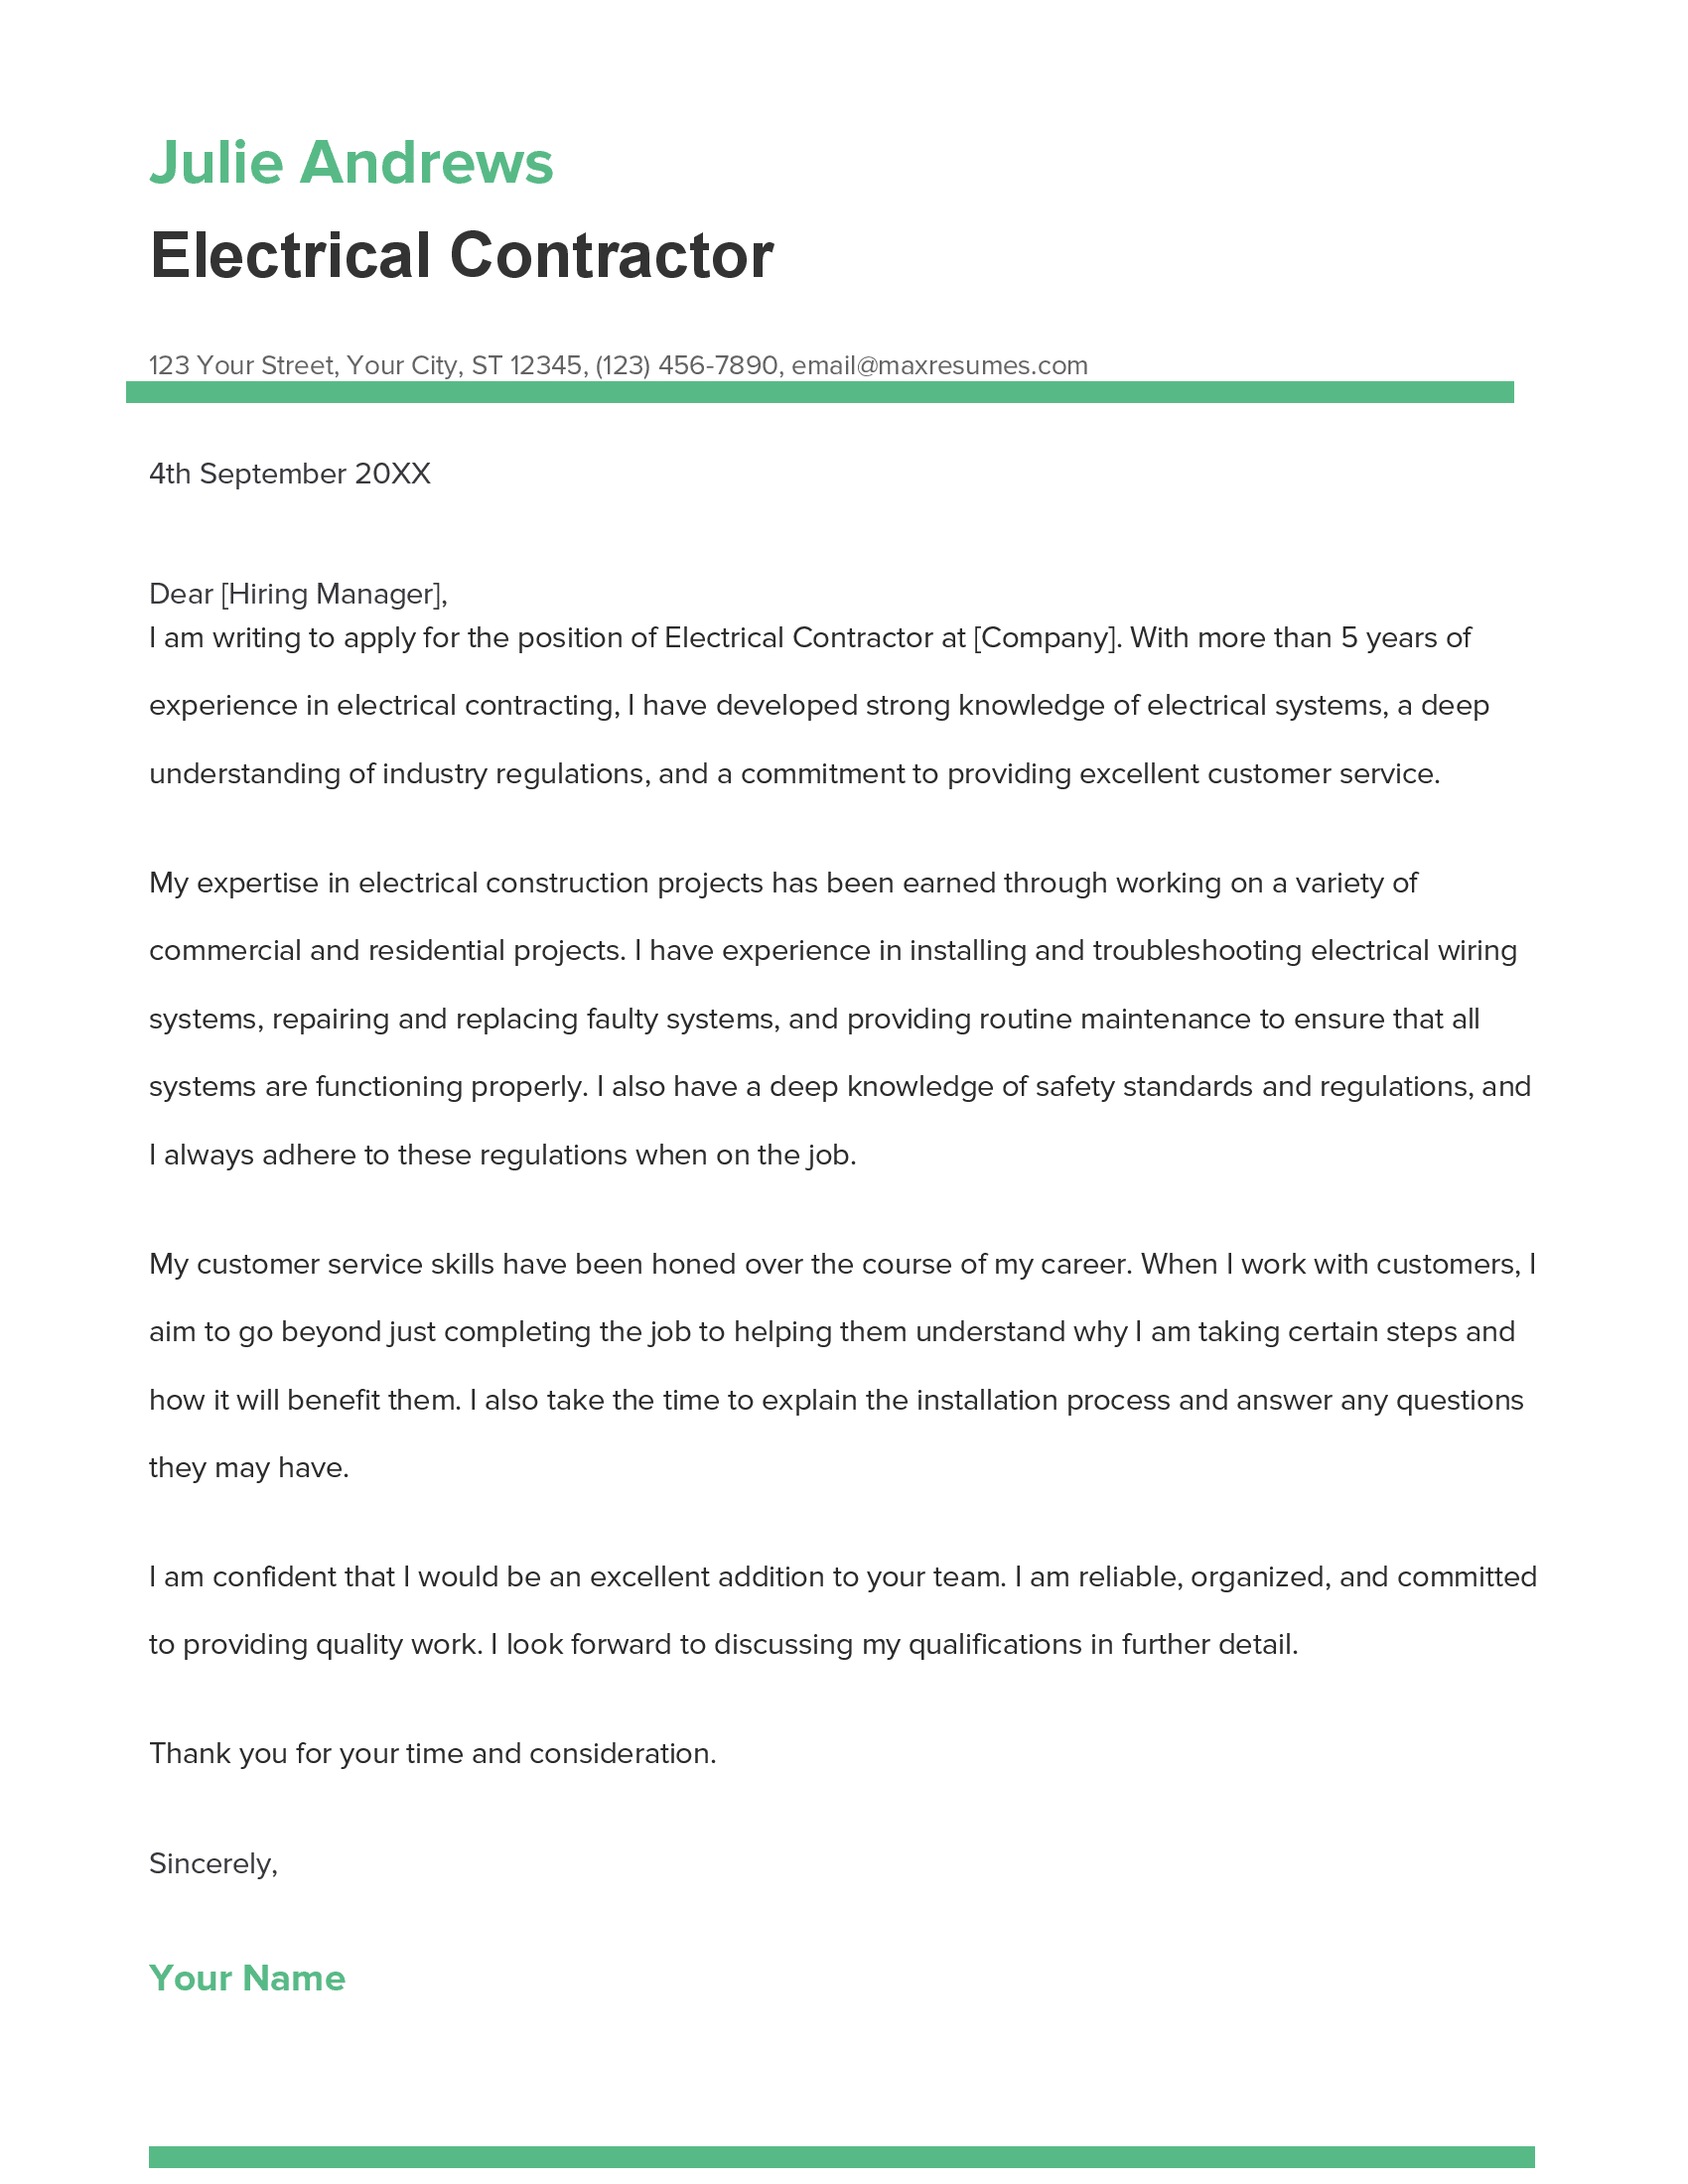 Electrical Contractor Cover Letter Example